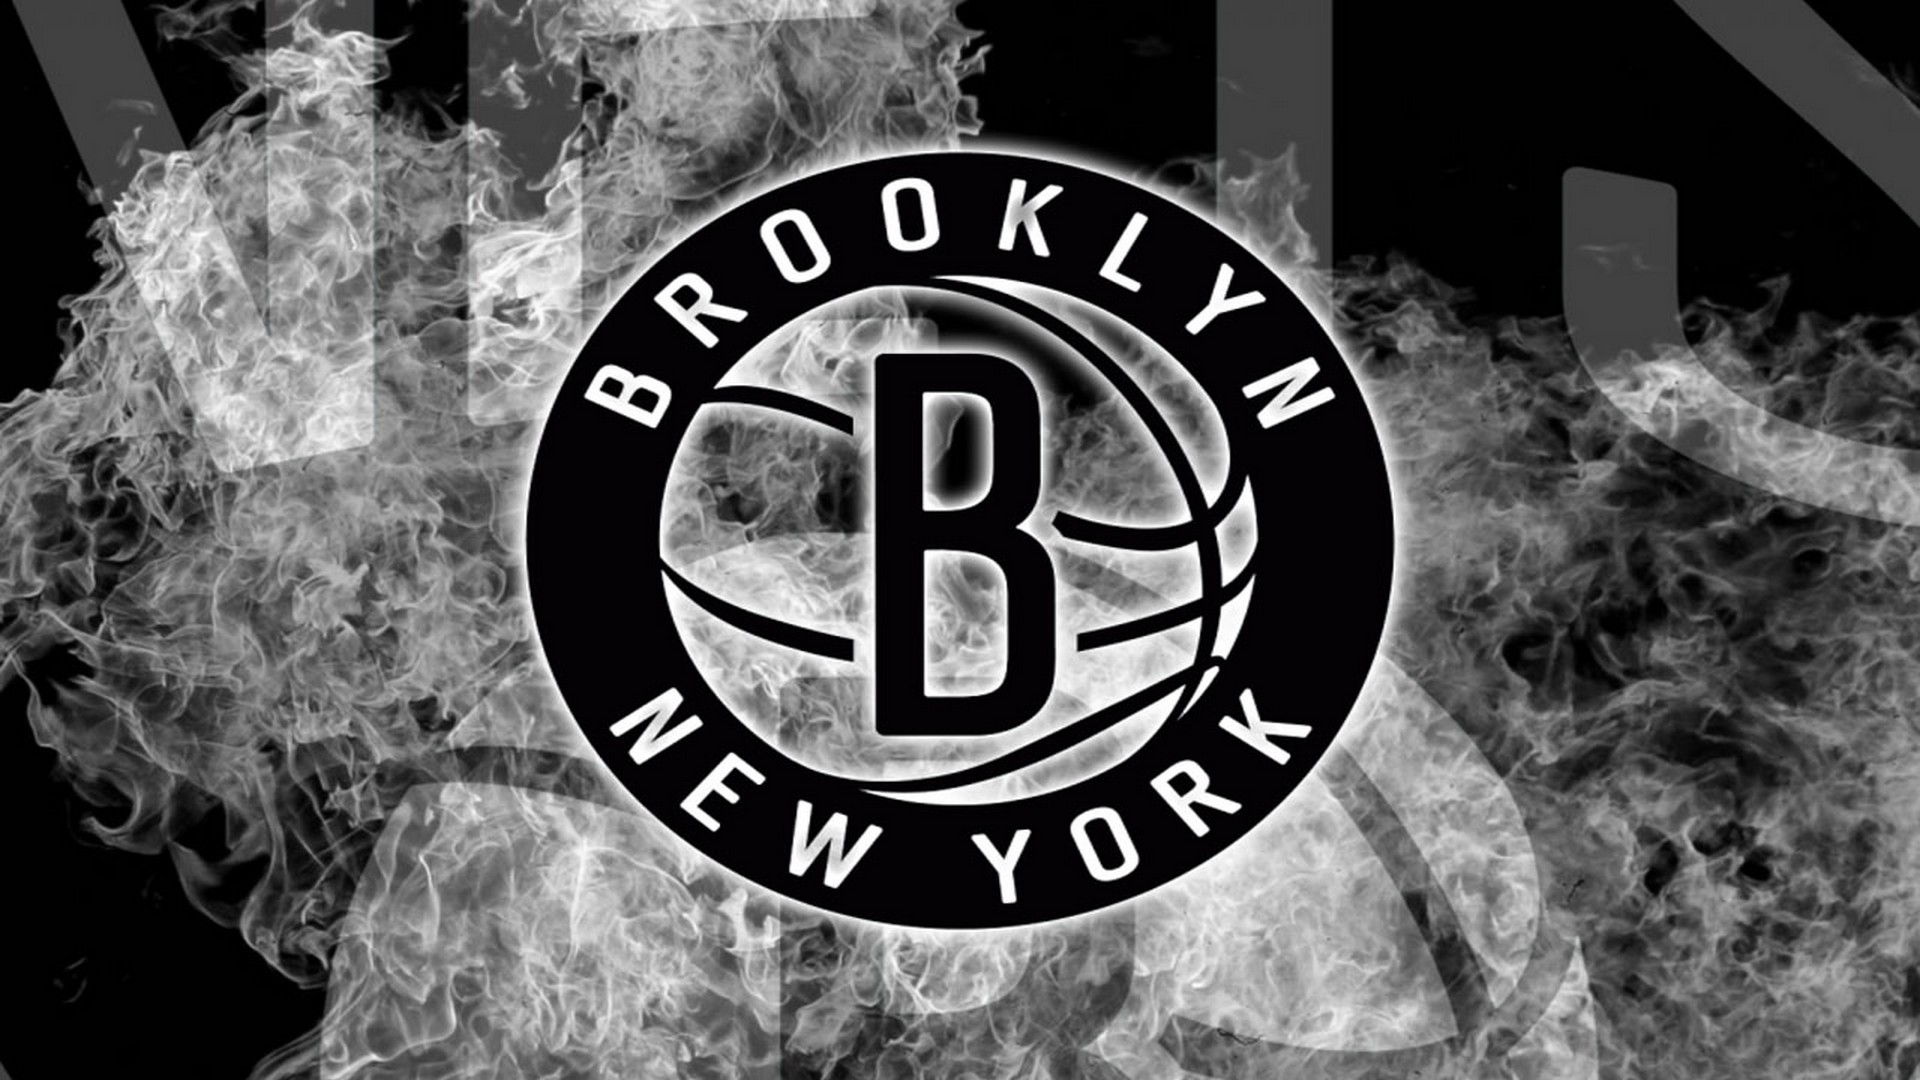 HD Backgrounds Brooklyn Nets with image dimensions 1920X1080 pixel. You can make this wallpaper for your Desktop Computer Backgrounds, Windows or Mac Screensavers, iPhone Lock screen, Tablet or Android and another Mobile Phone device